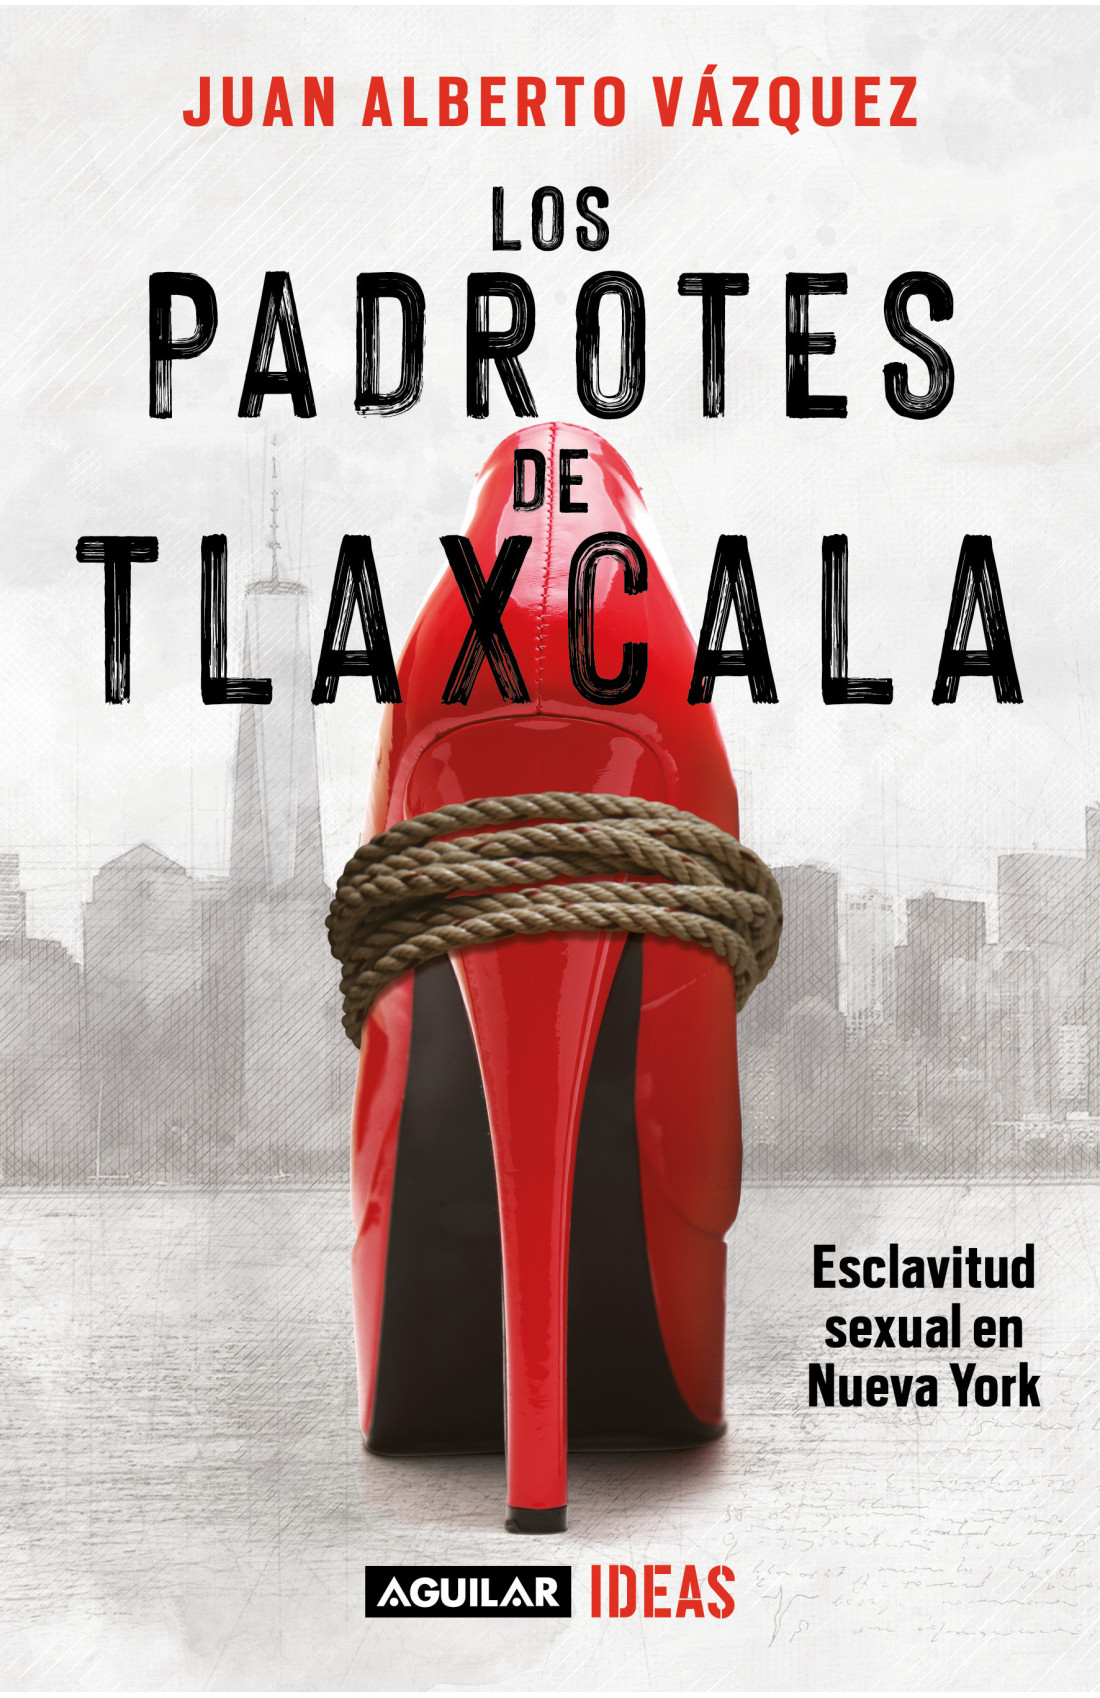 Cover of the book "Los Padrotes de Tlaxcala", by Mexican journalist Juan Alberto Vázquez.